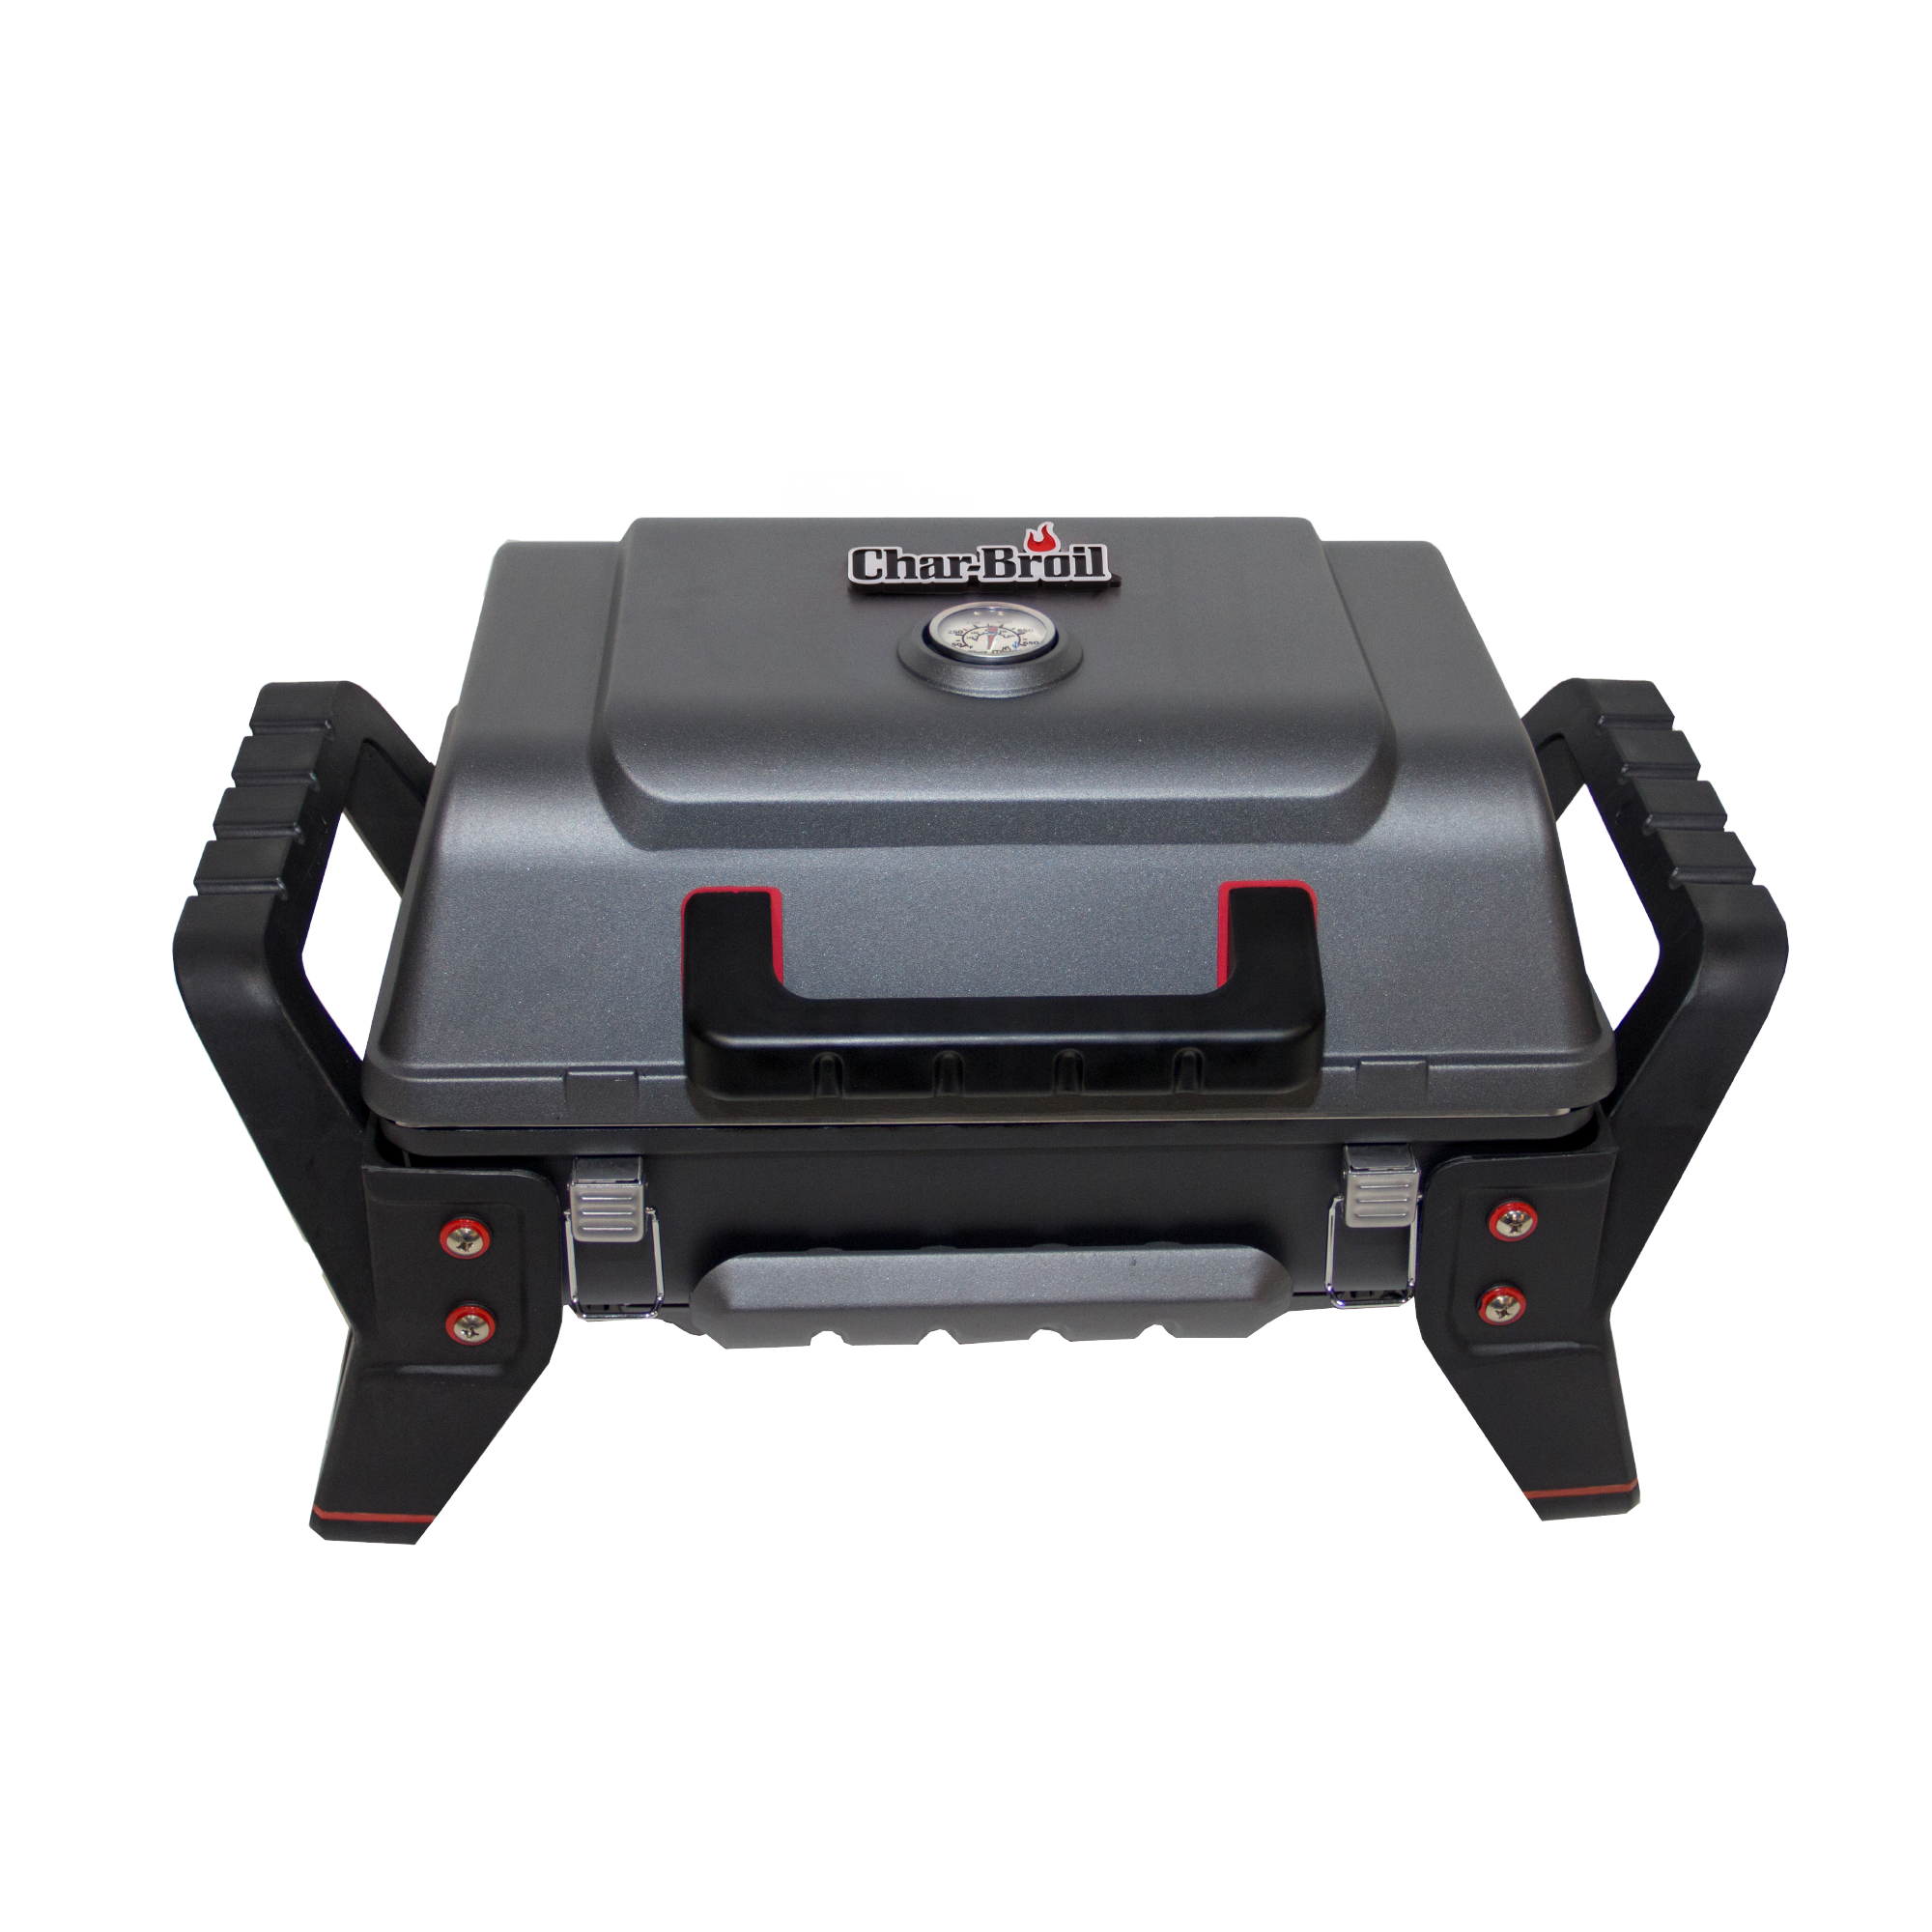 Char-Broil Grill2Go® Portable Gas Grill - image 1 of 12